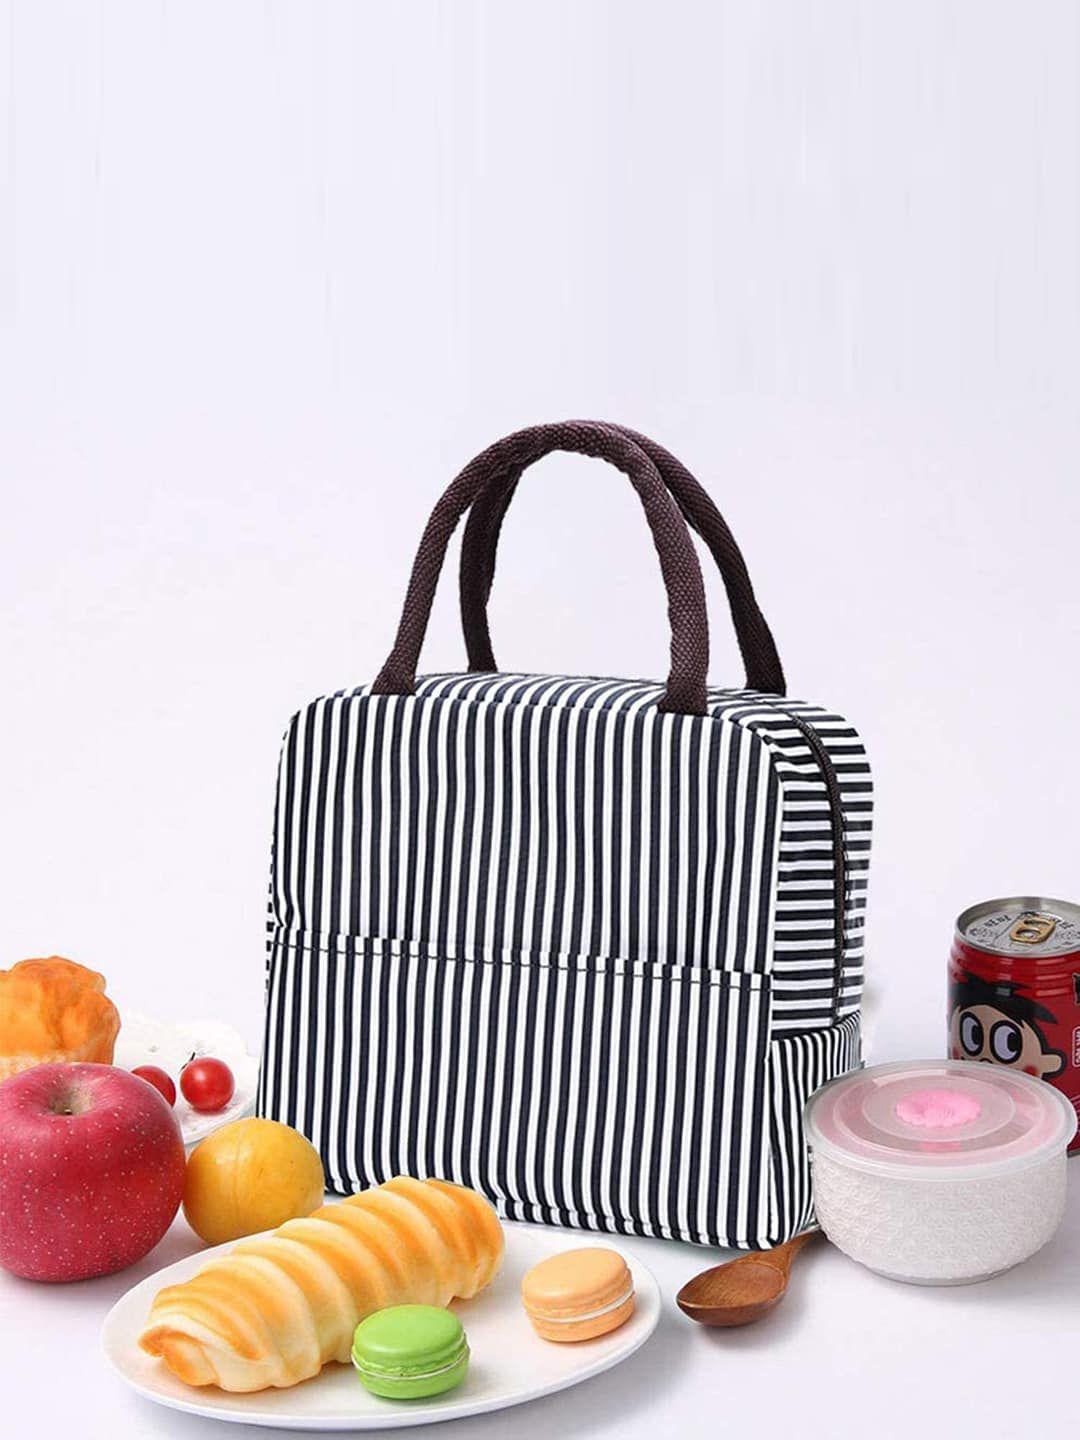 HOUSE OF QUIRK Black & White Striped Insulated Lunch Bag Price in India